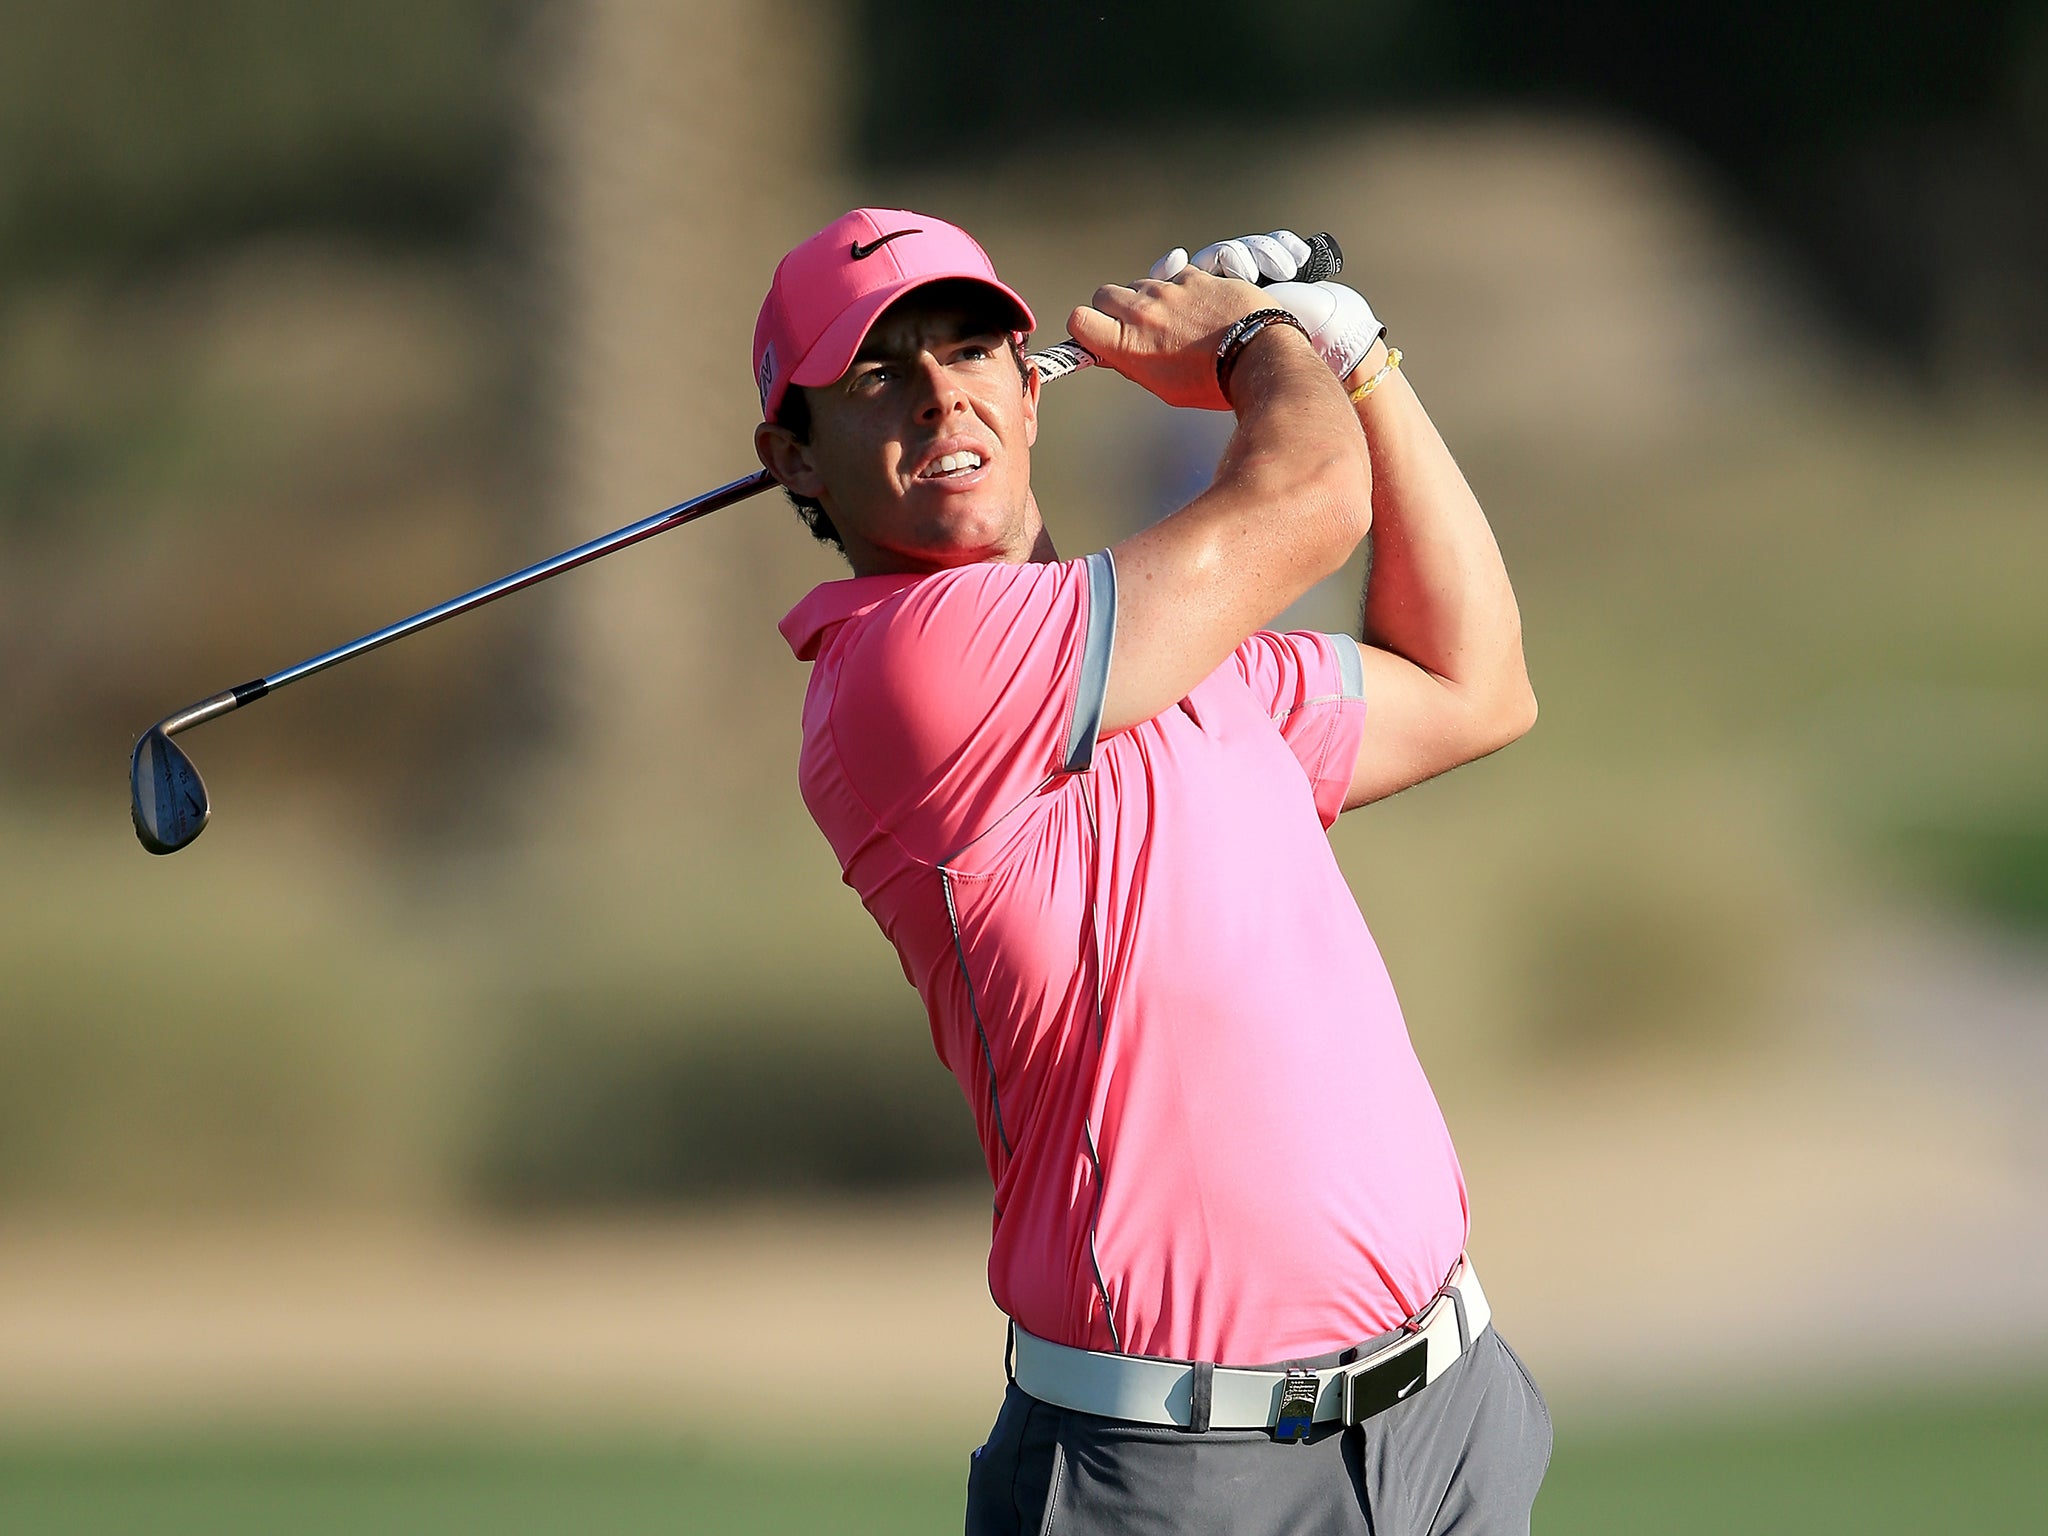 Dubai Desert Classic 2015 Rory McIlroy is in another world as Tiger